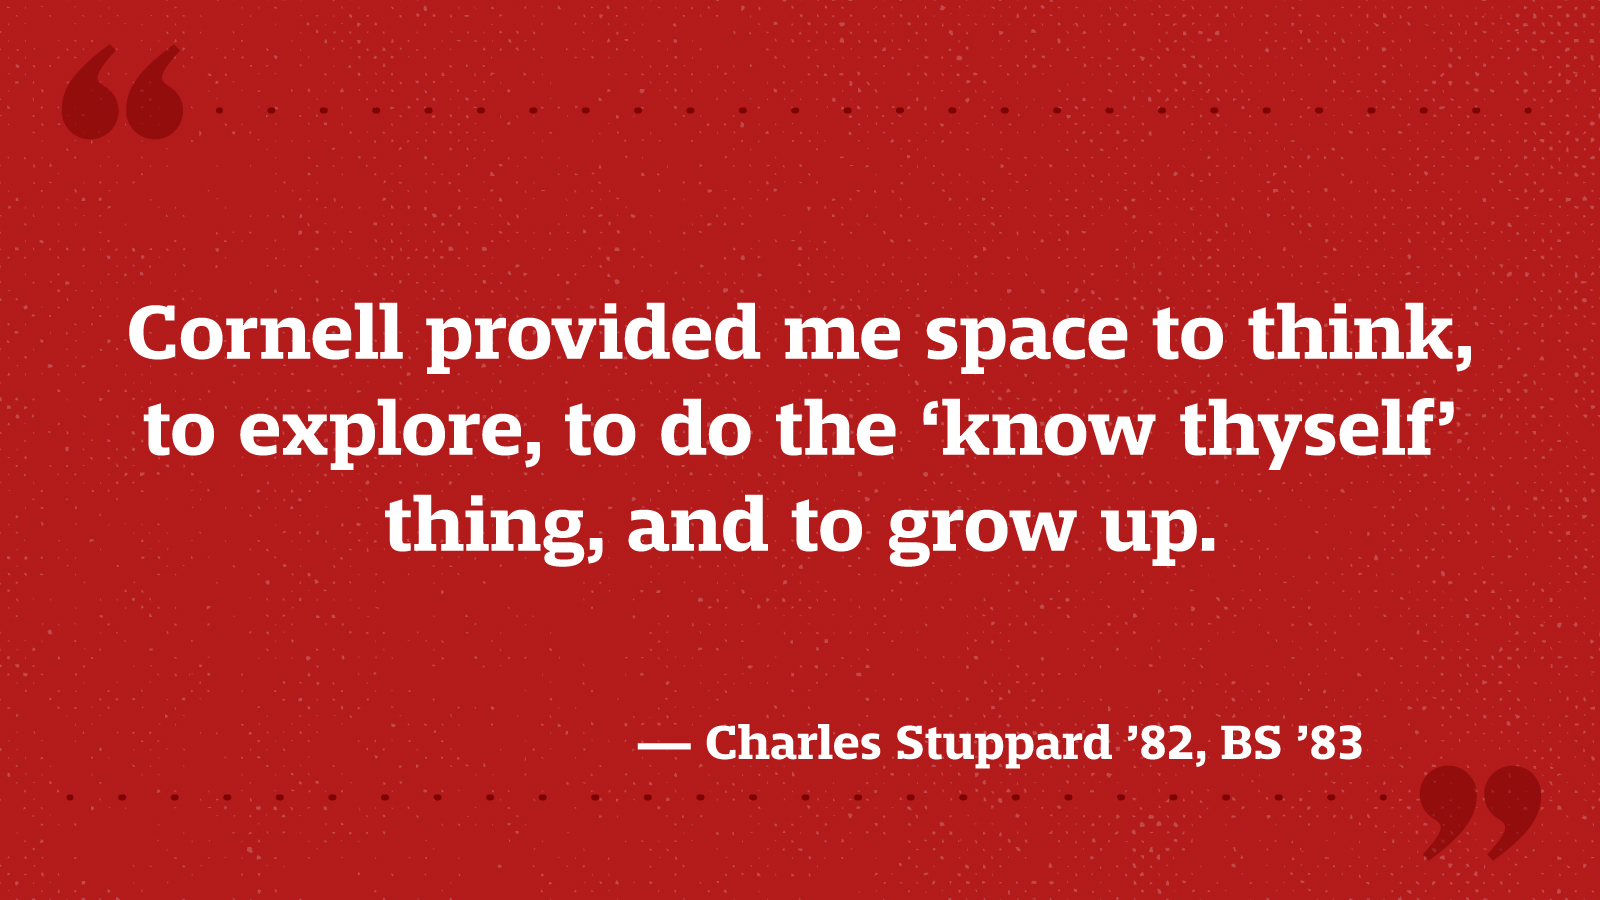 Cornell provided me space to think, to explore, to do the ‘know thyself’ thing, and to grow up. — Charles Stuppard ’82, BS ’83